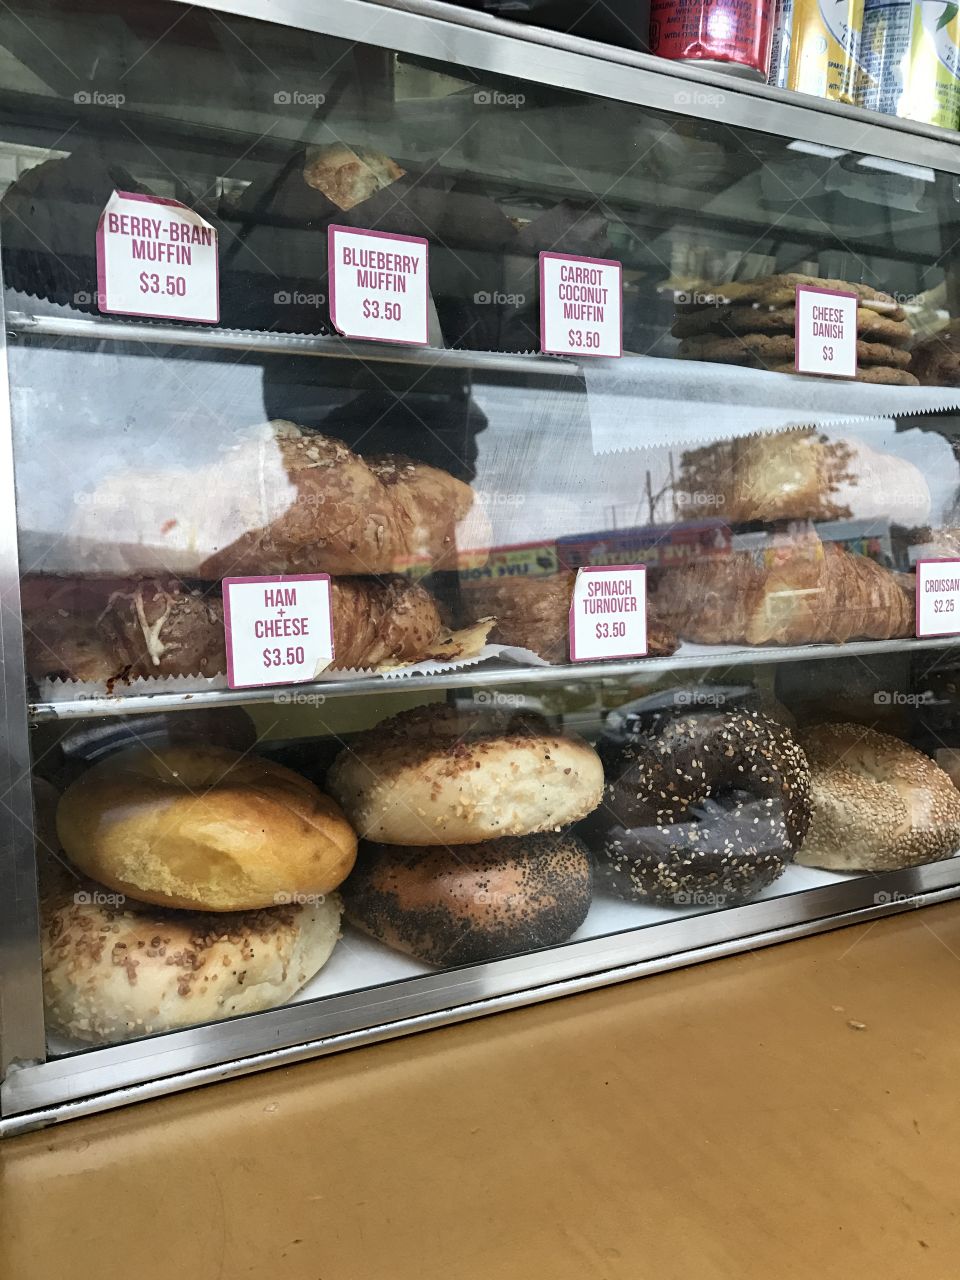 Brooklyn Baked Goods and Breakfast